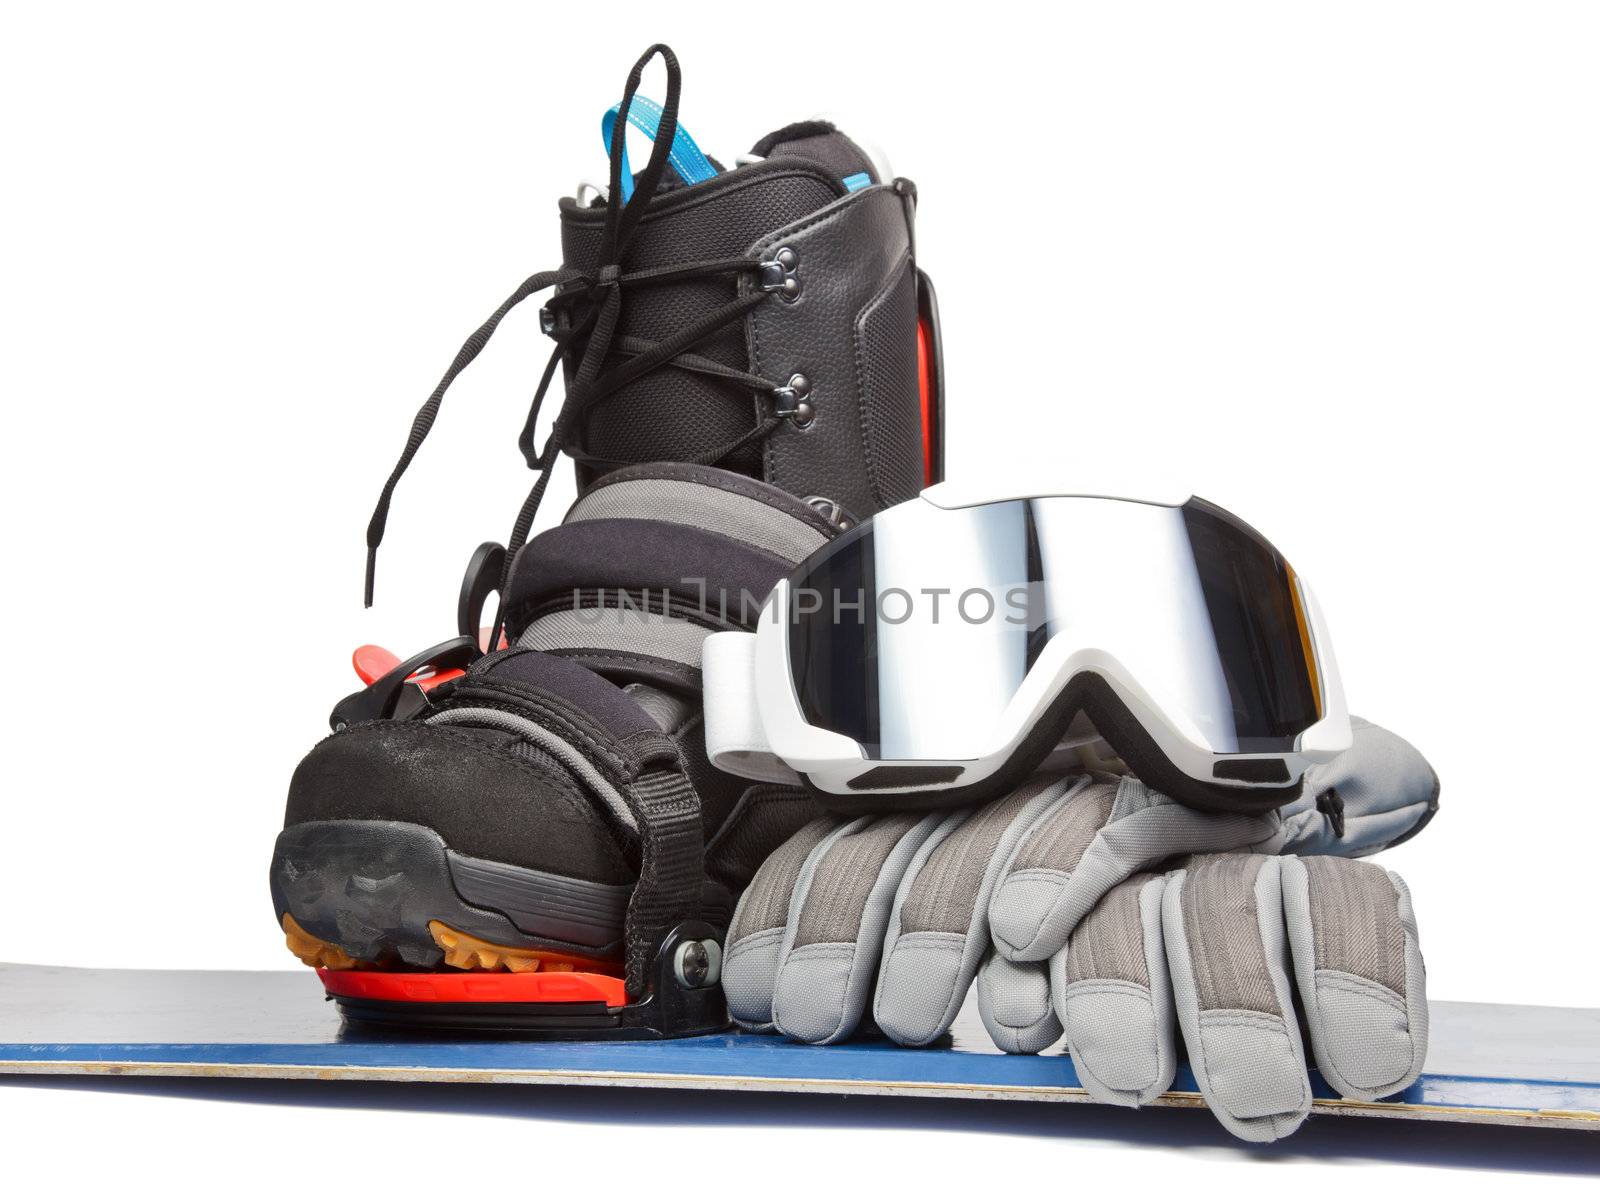 Snowboard with boot gloves and goggles on white background